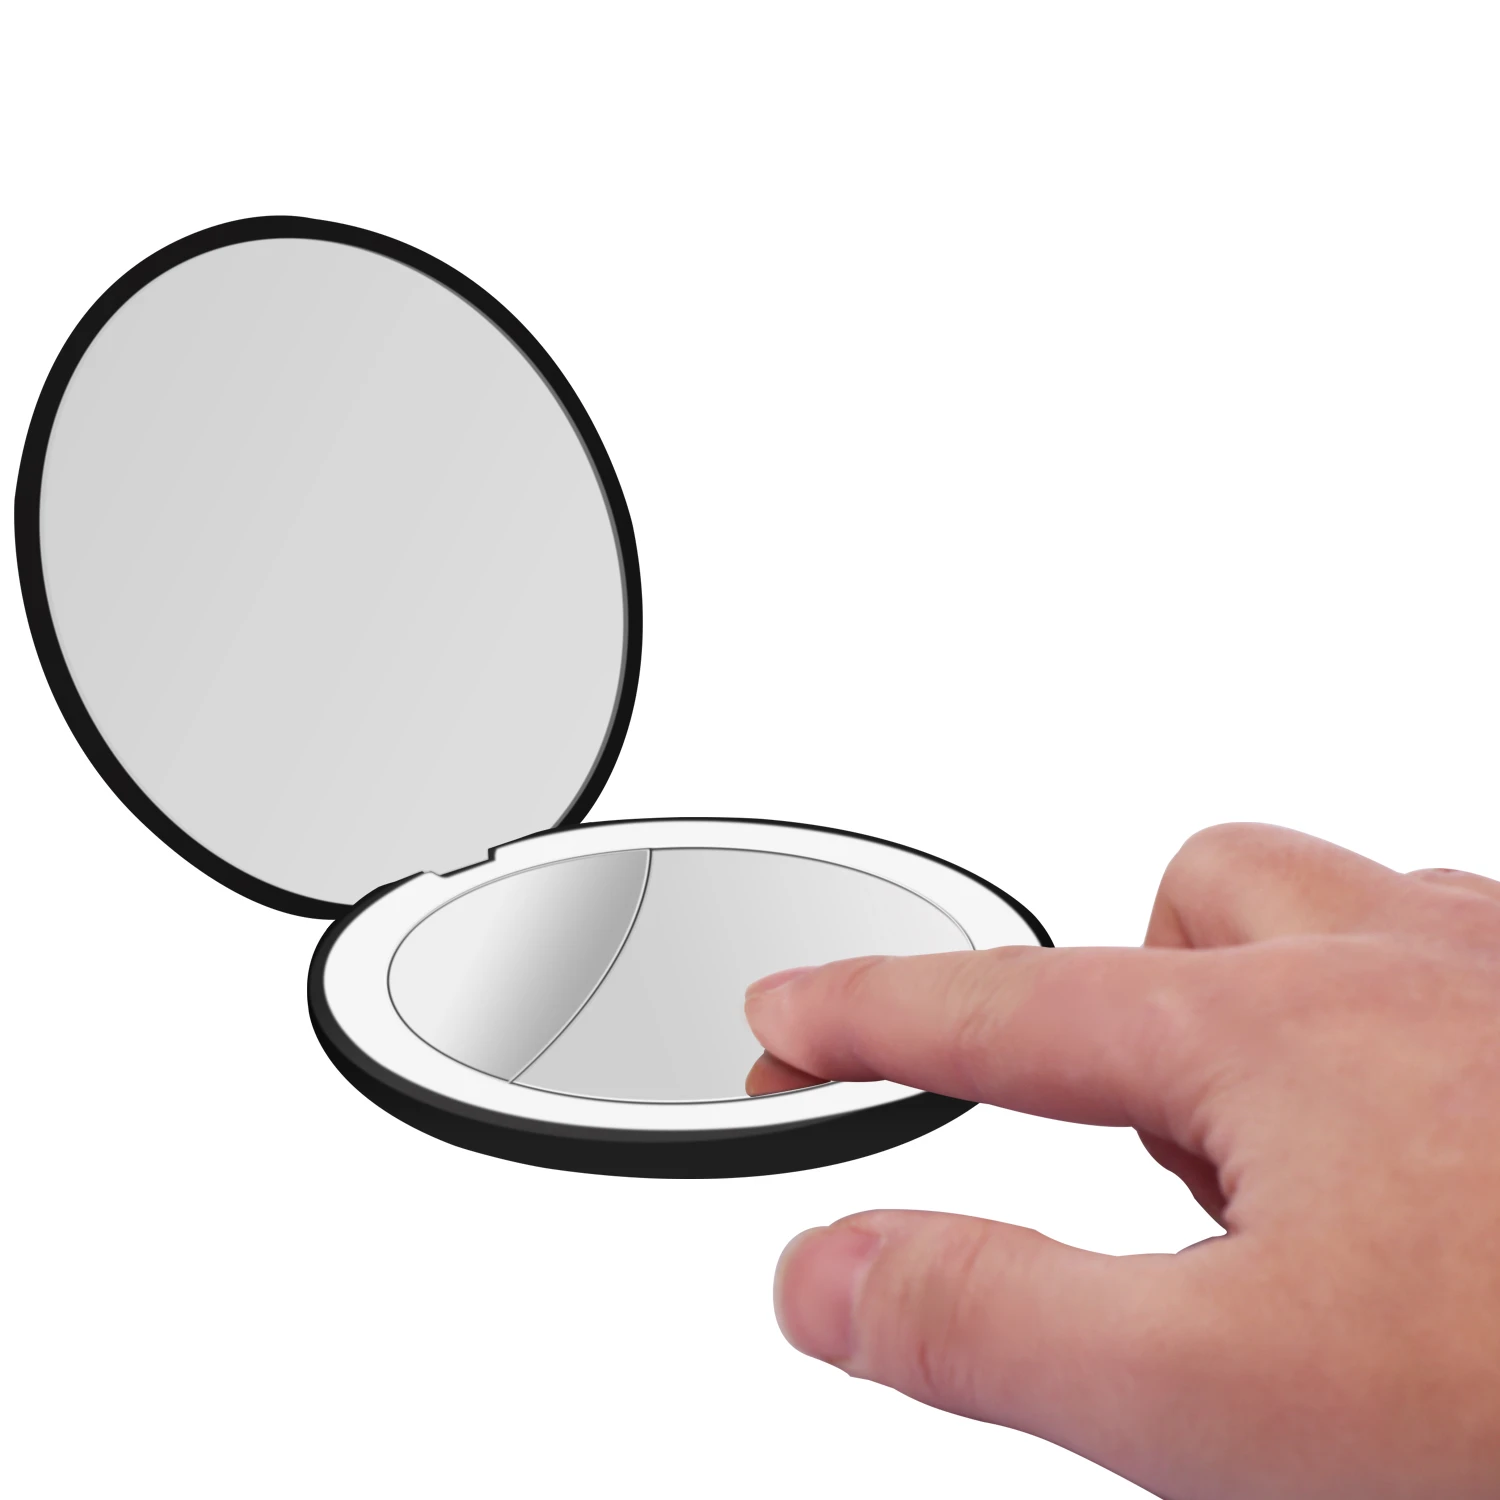 New Led Rechargeable Compact Mirror 2-sided 1x/10x Magnification Compact  Travel Makeup Tool Accessories Folding Handheld Mirror - Makeup Mirrors -  AliExpress